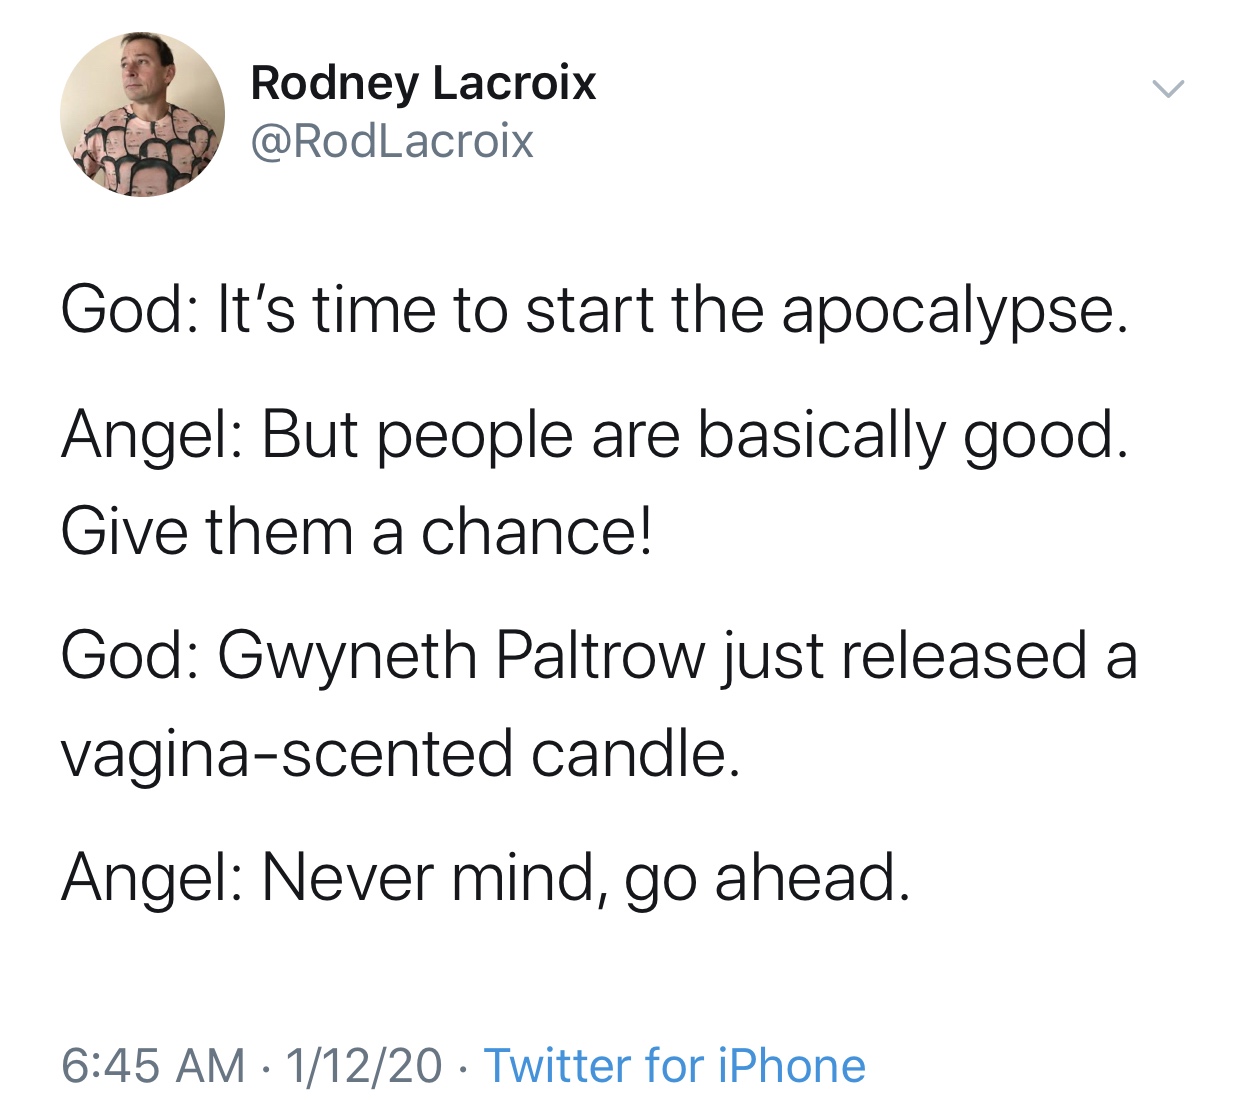 modern warfare 2019 rating - Rodney Lacroix God It's time to start the apocalypse. Angel But people are basically good. Give them a chance! God Gwyneth Paltrow just released a vaginascented candle. Angel Never mind, go ahead. 11220 Twitter for iPhone